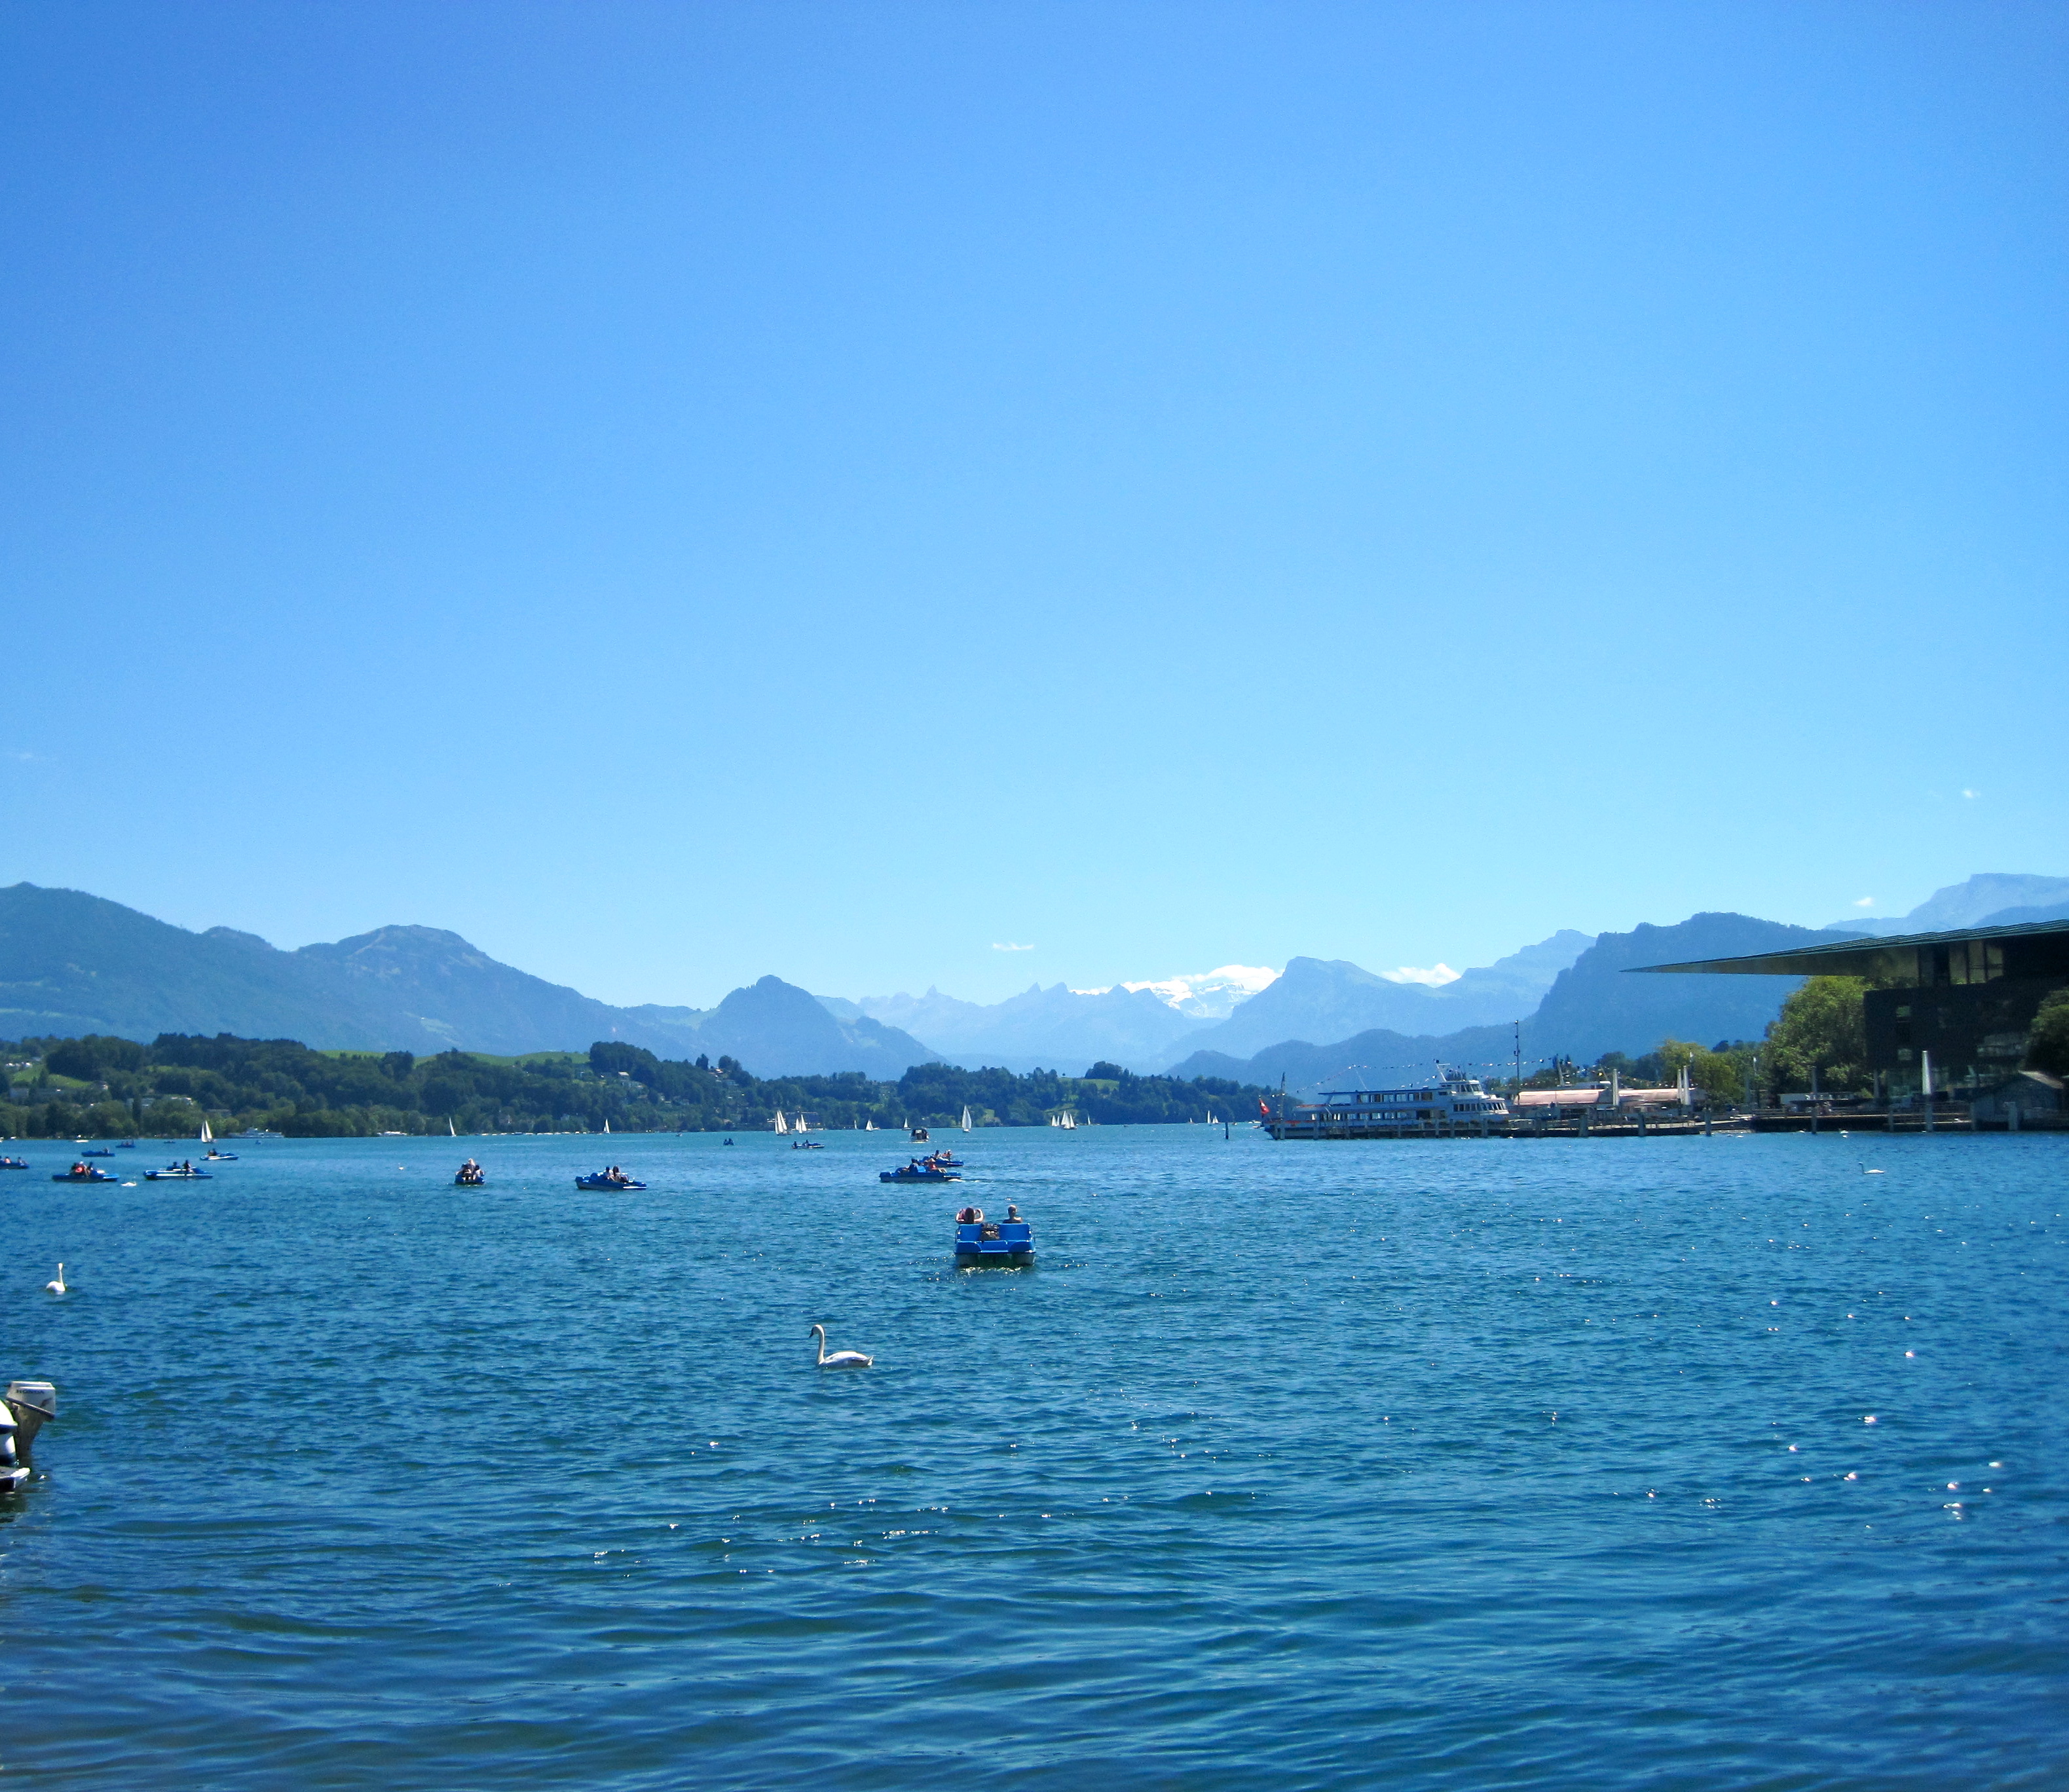 Discerning The Connections of Travel On Lake Lucerne